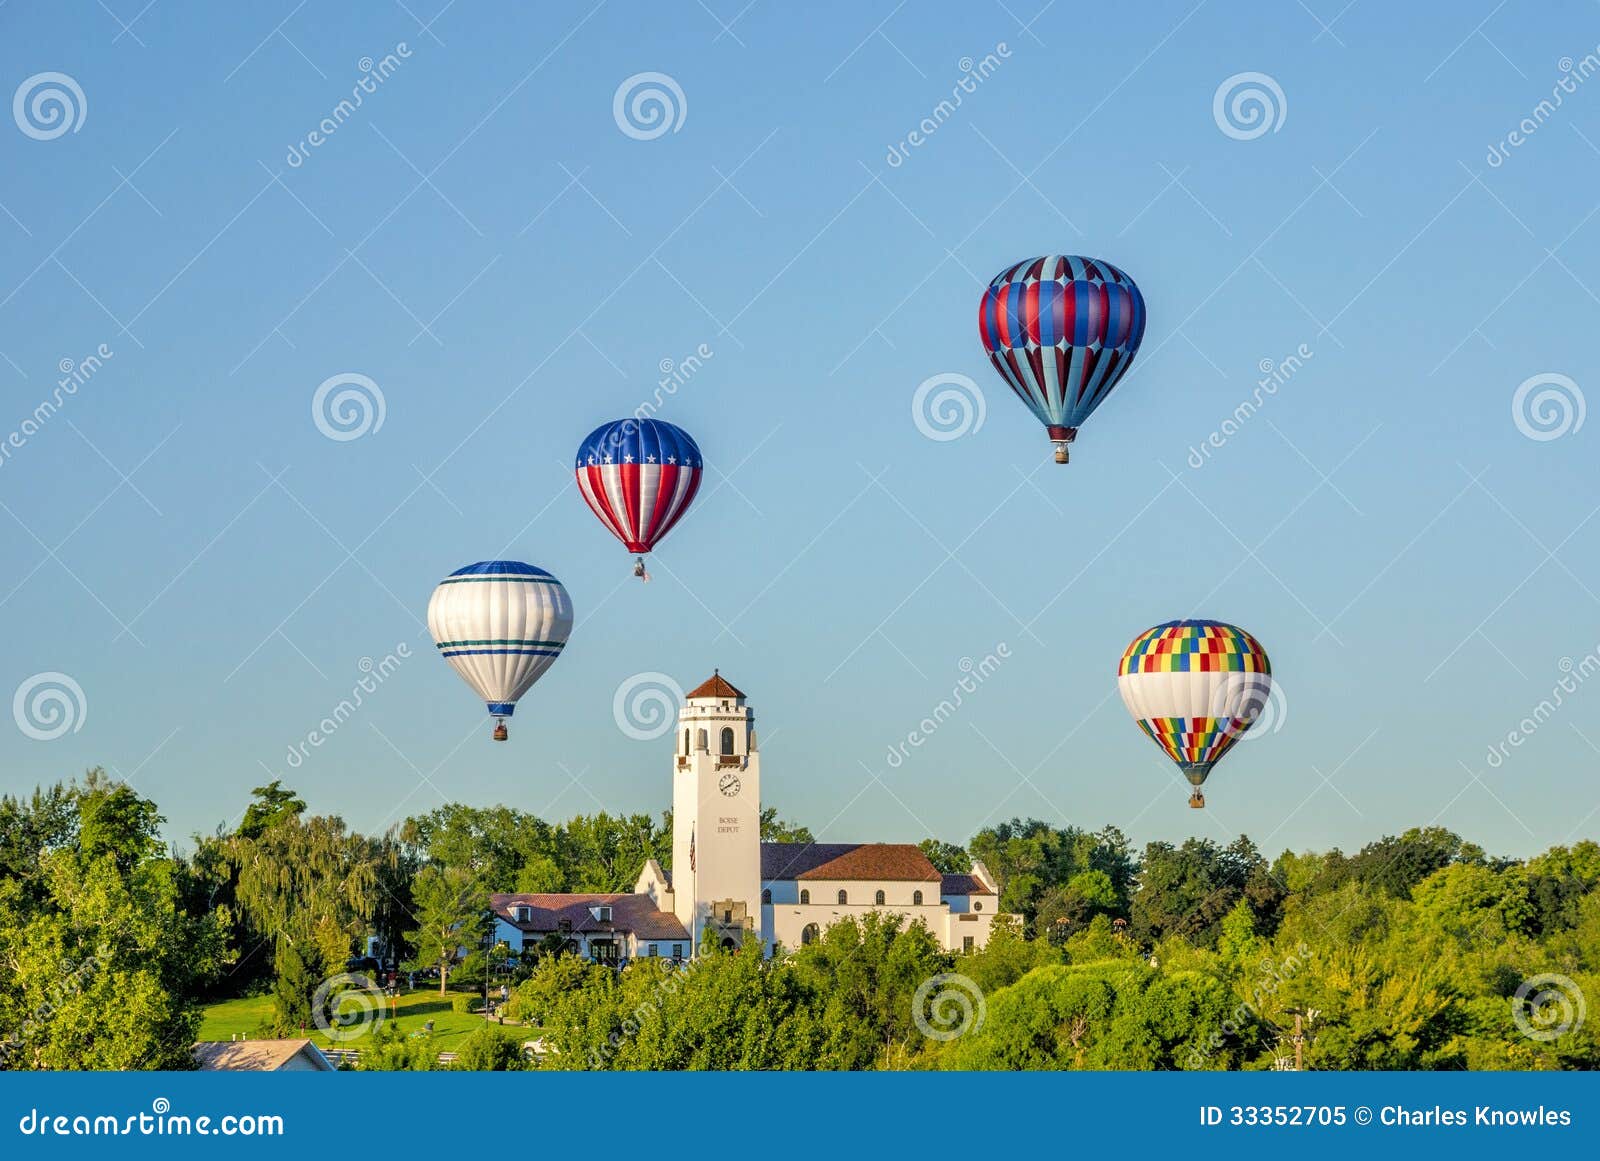 boise train depot with hot air balloons